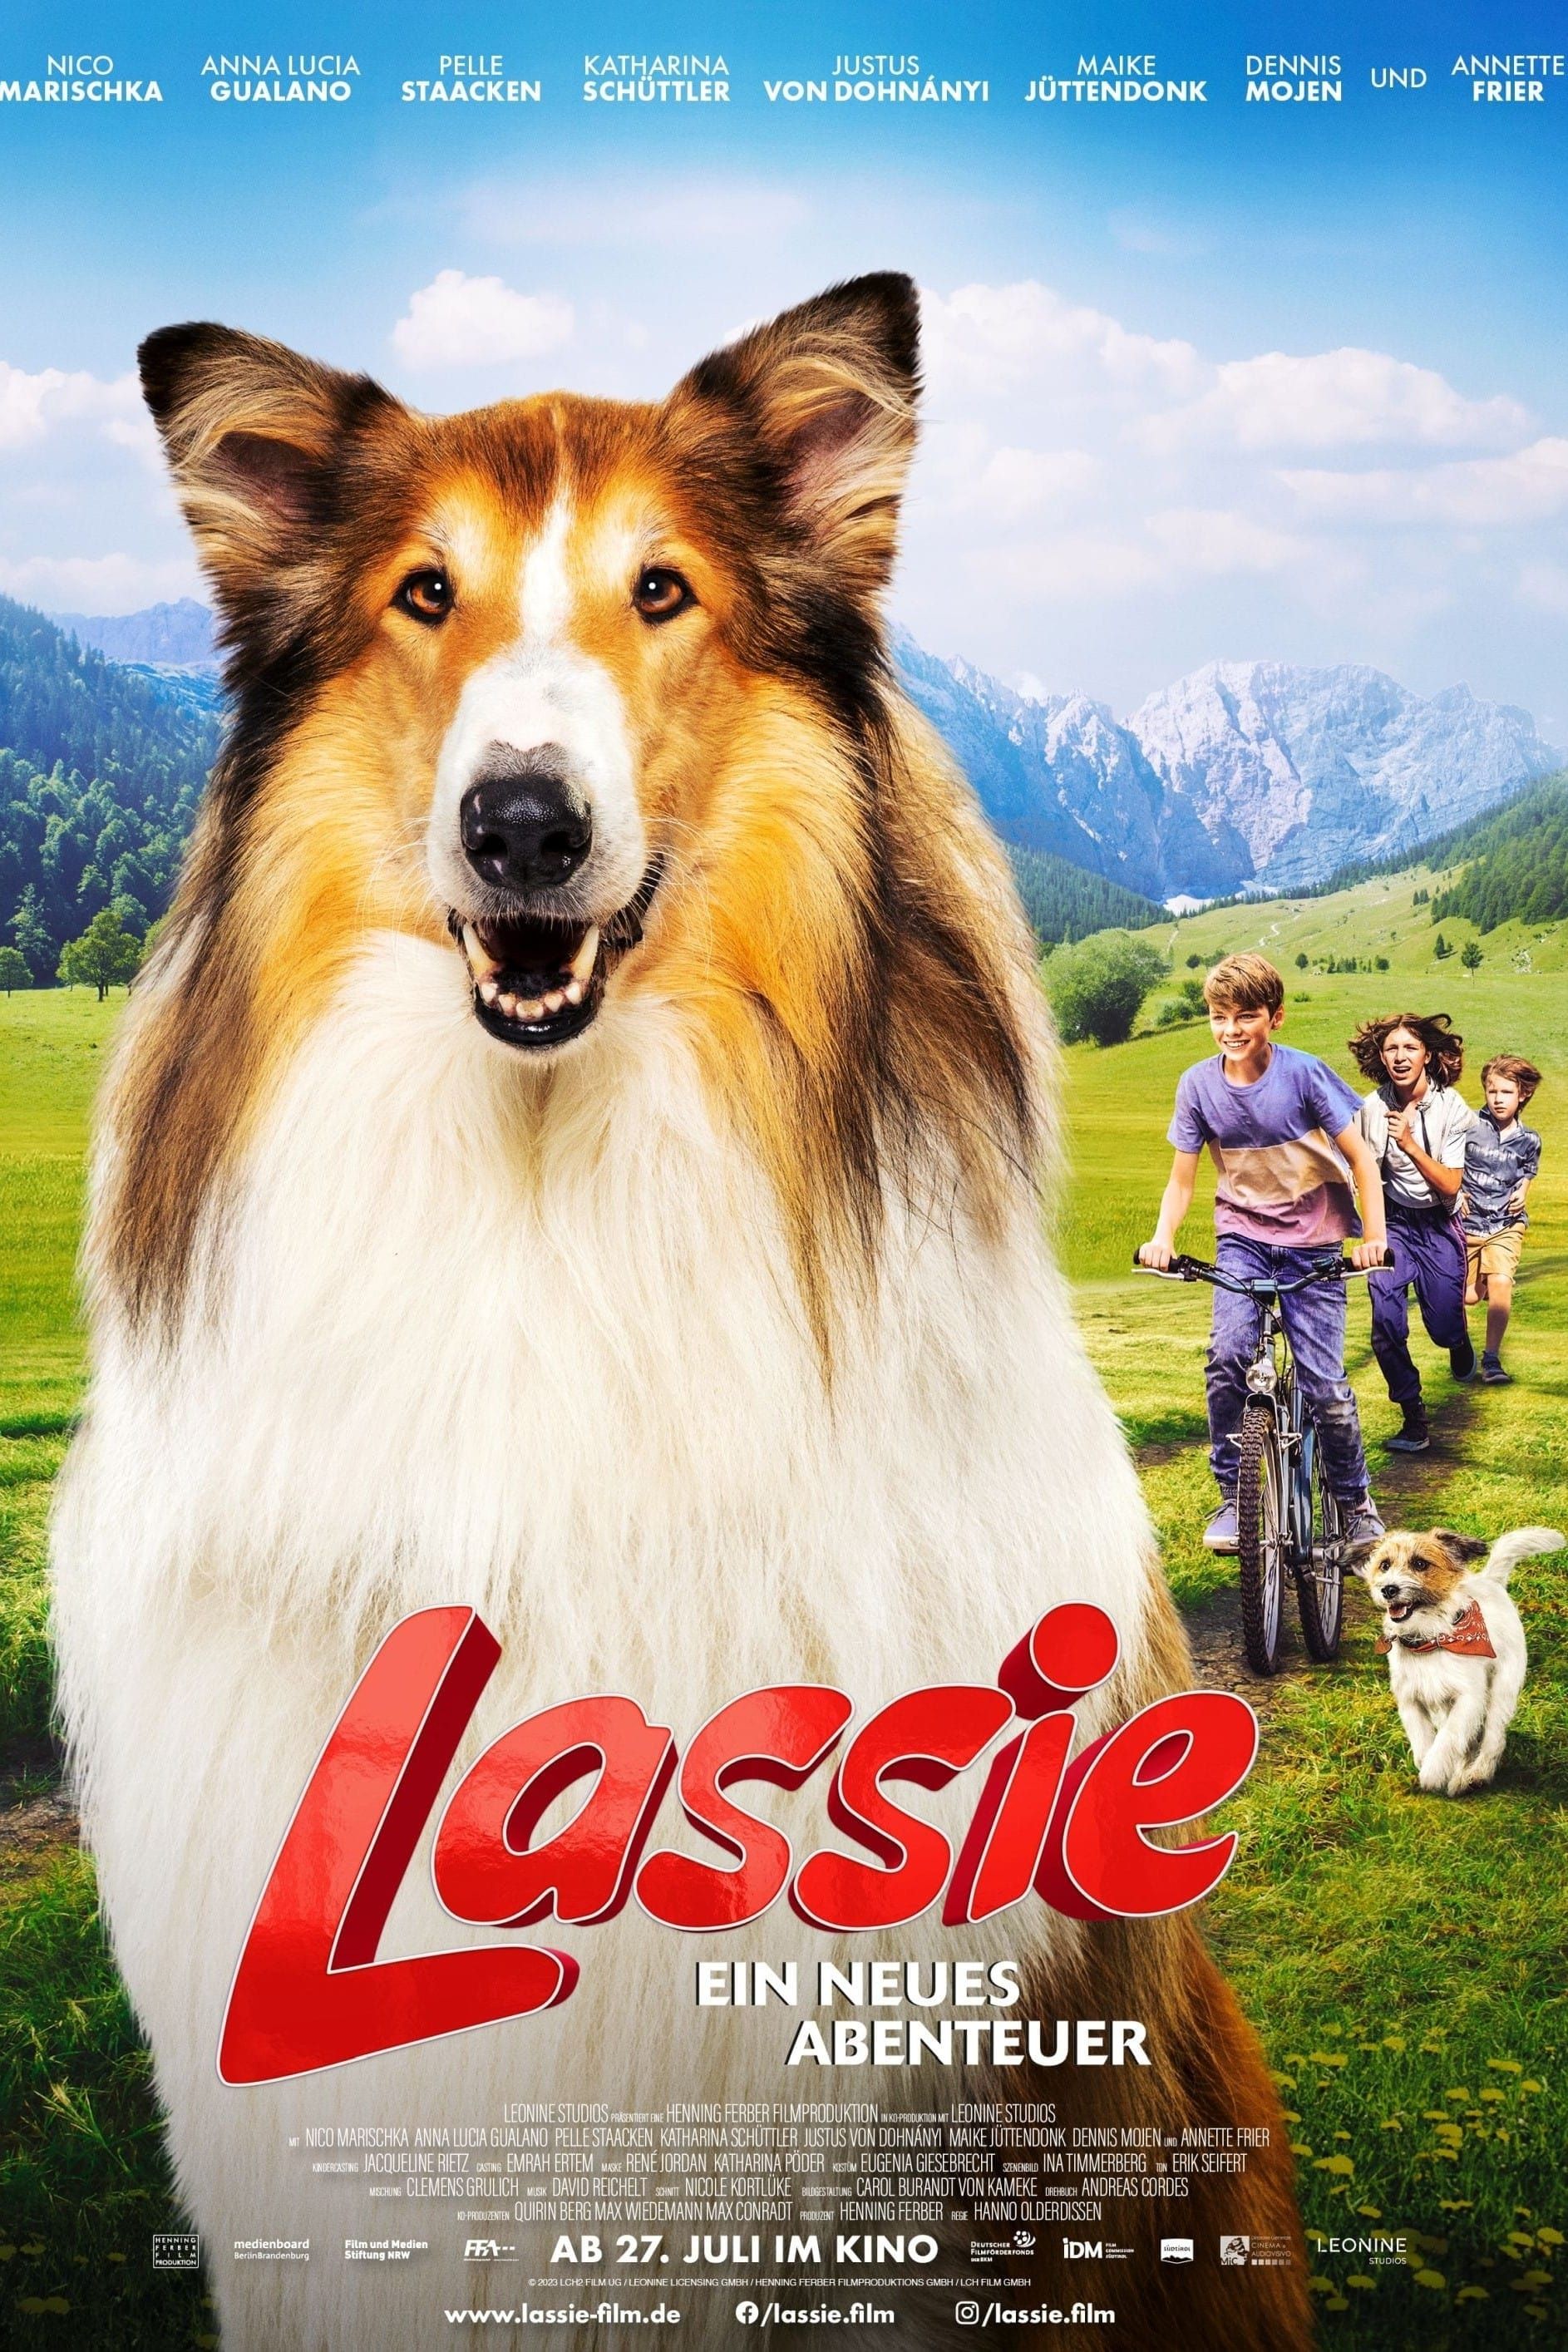 Lassie Web: Movies and Other Media